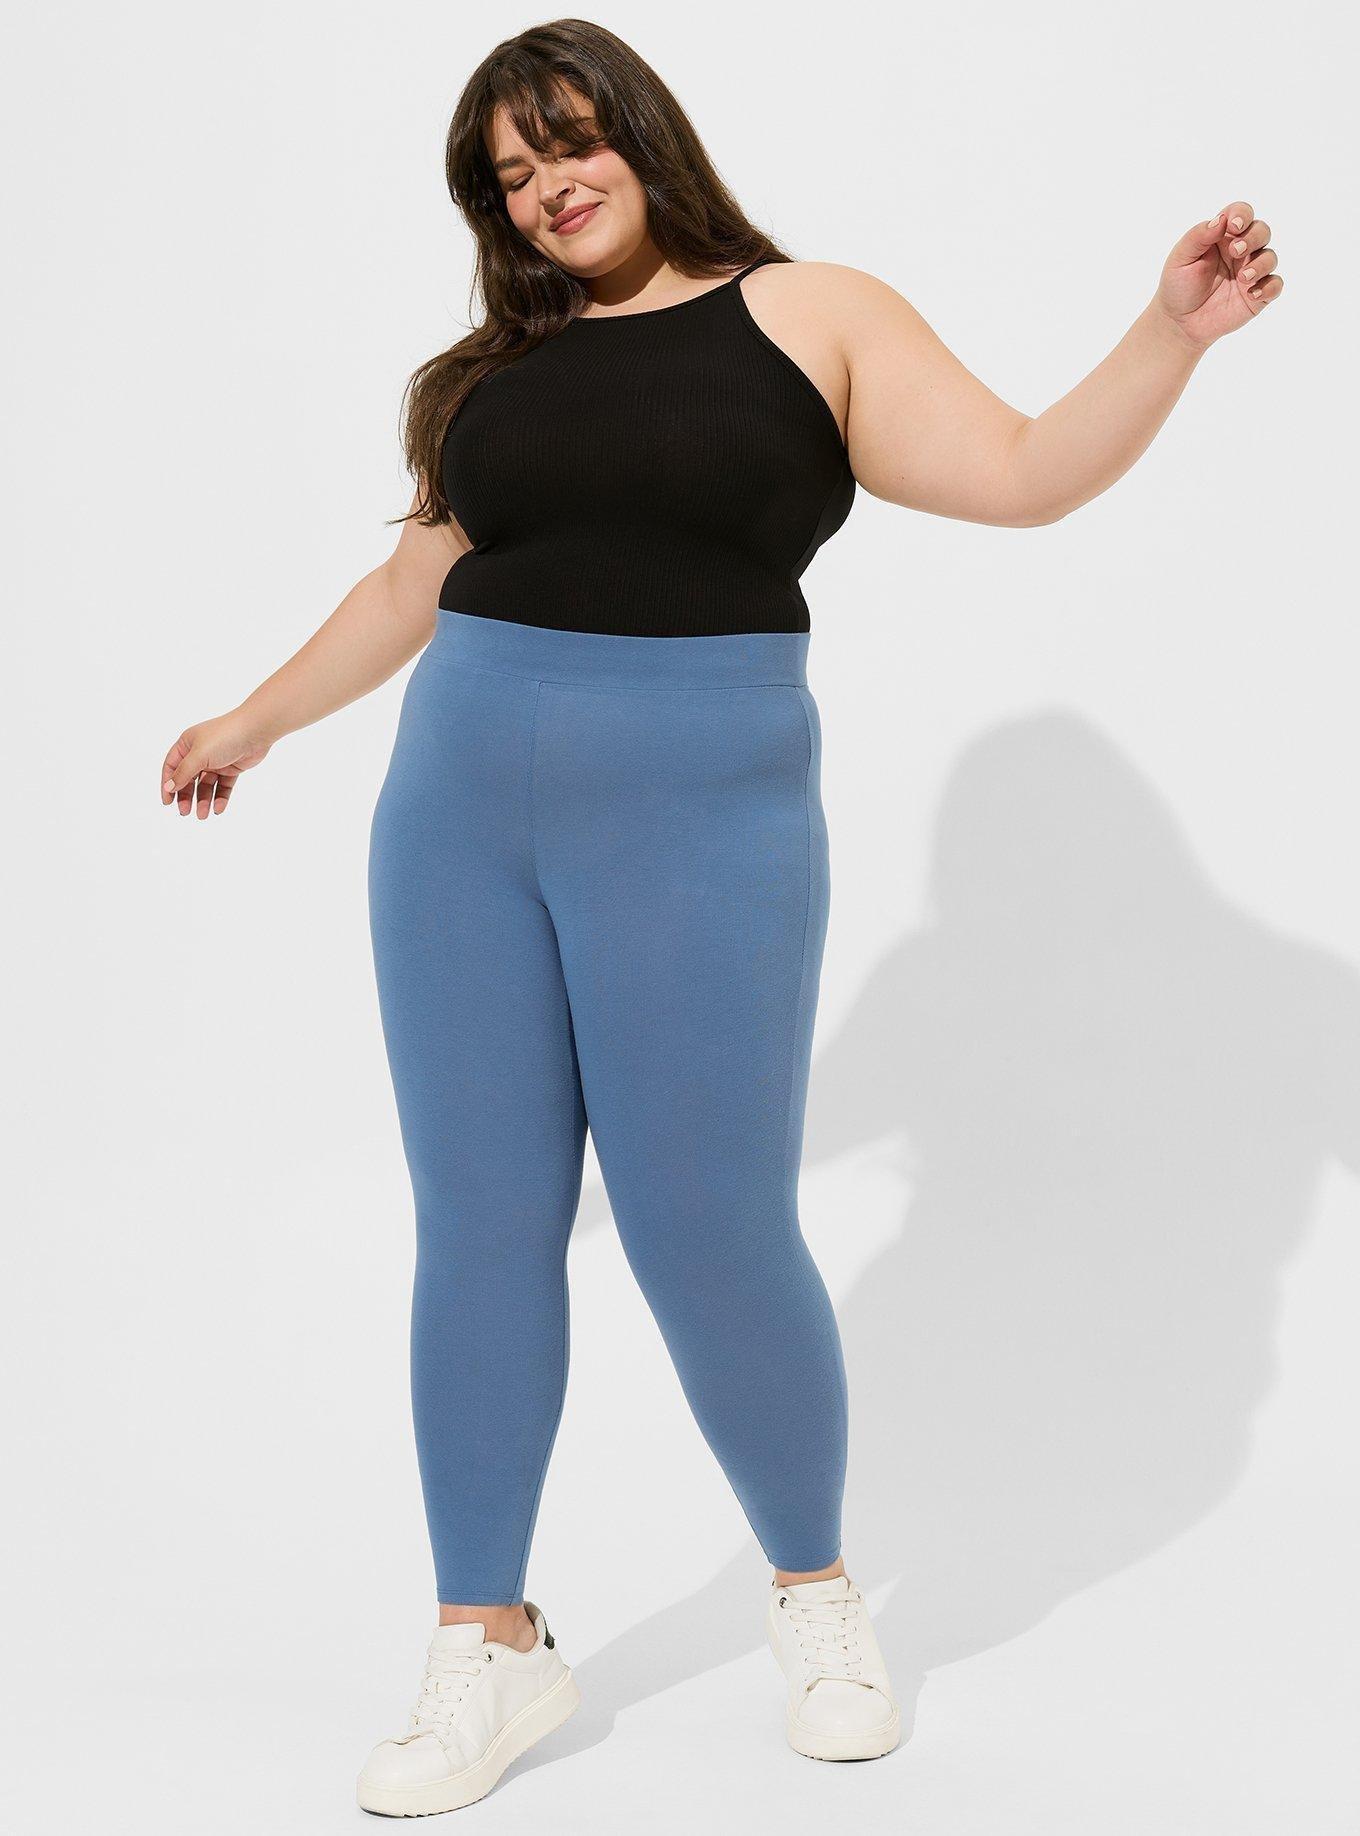  High Waisted Leggings for Women - Soft Athletic Tummy Control  Pants for Running Cycling Yoga Workout - Reg & Plus Size : Clothing, Shoes  & Jewelry